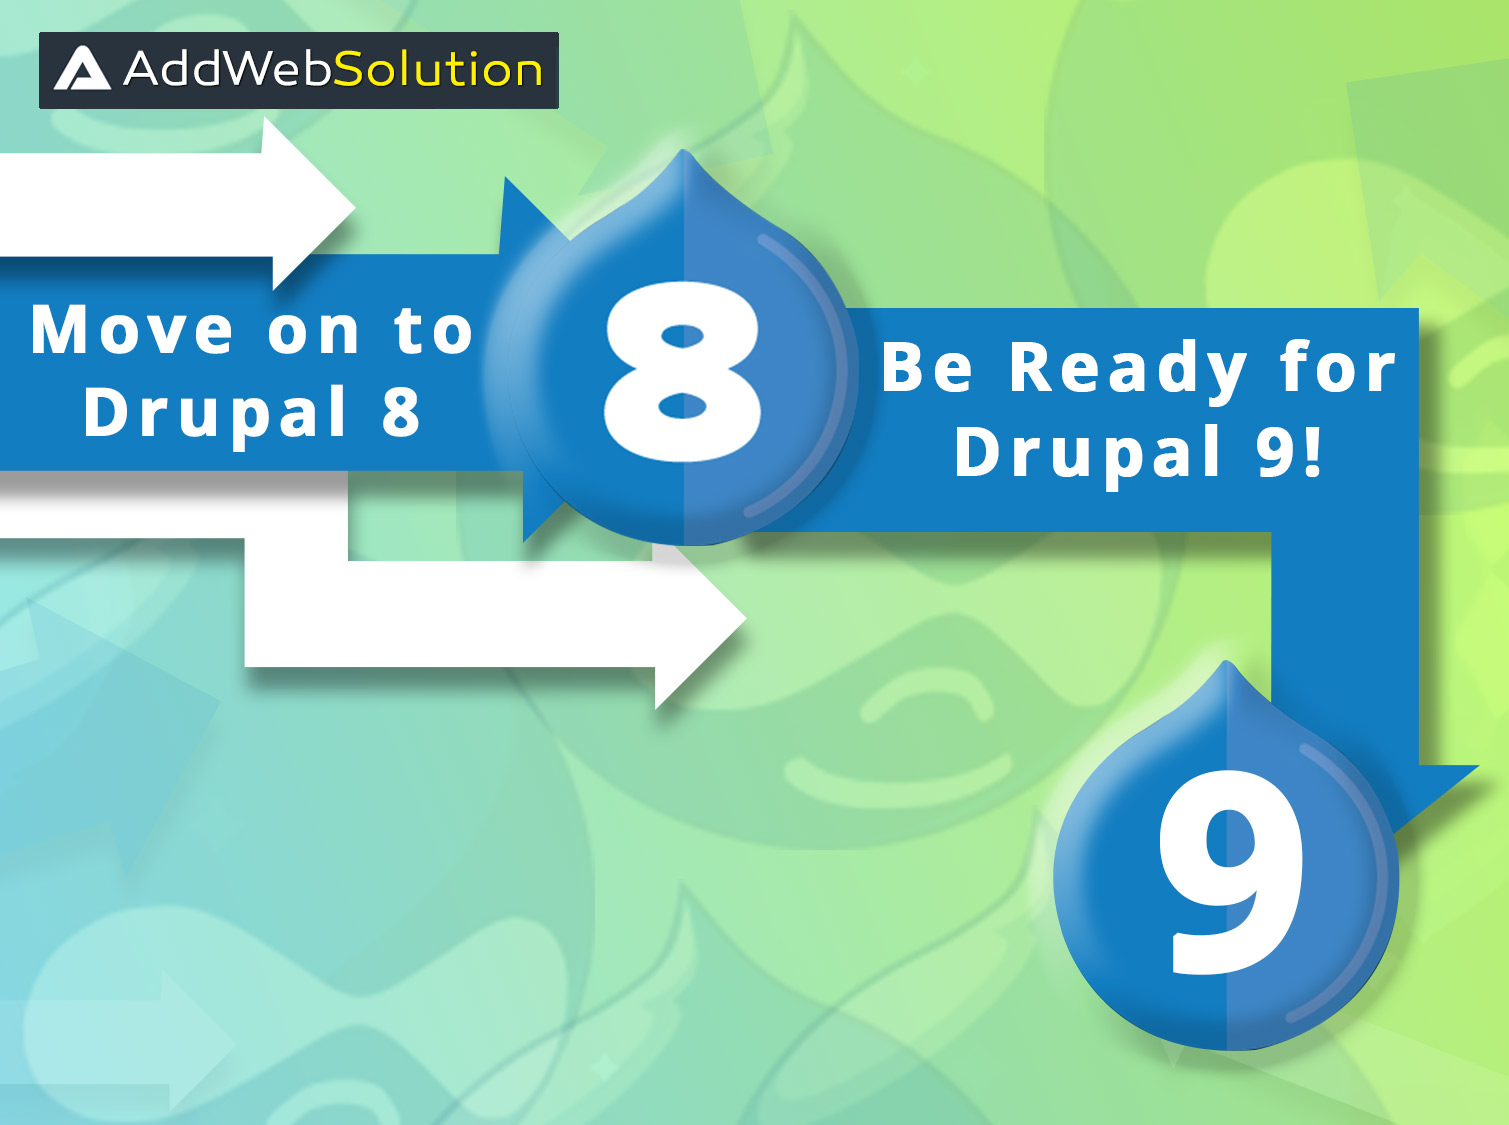 Move on to Drupal 8, Be Ready for Drupal 9!